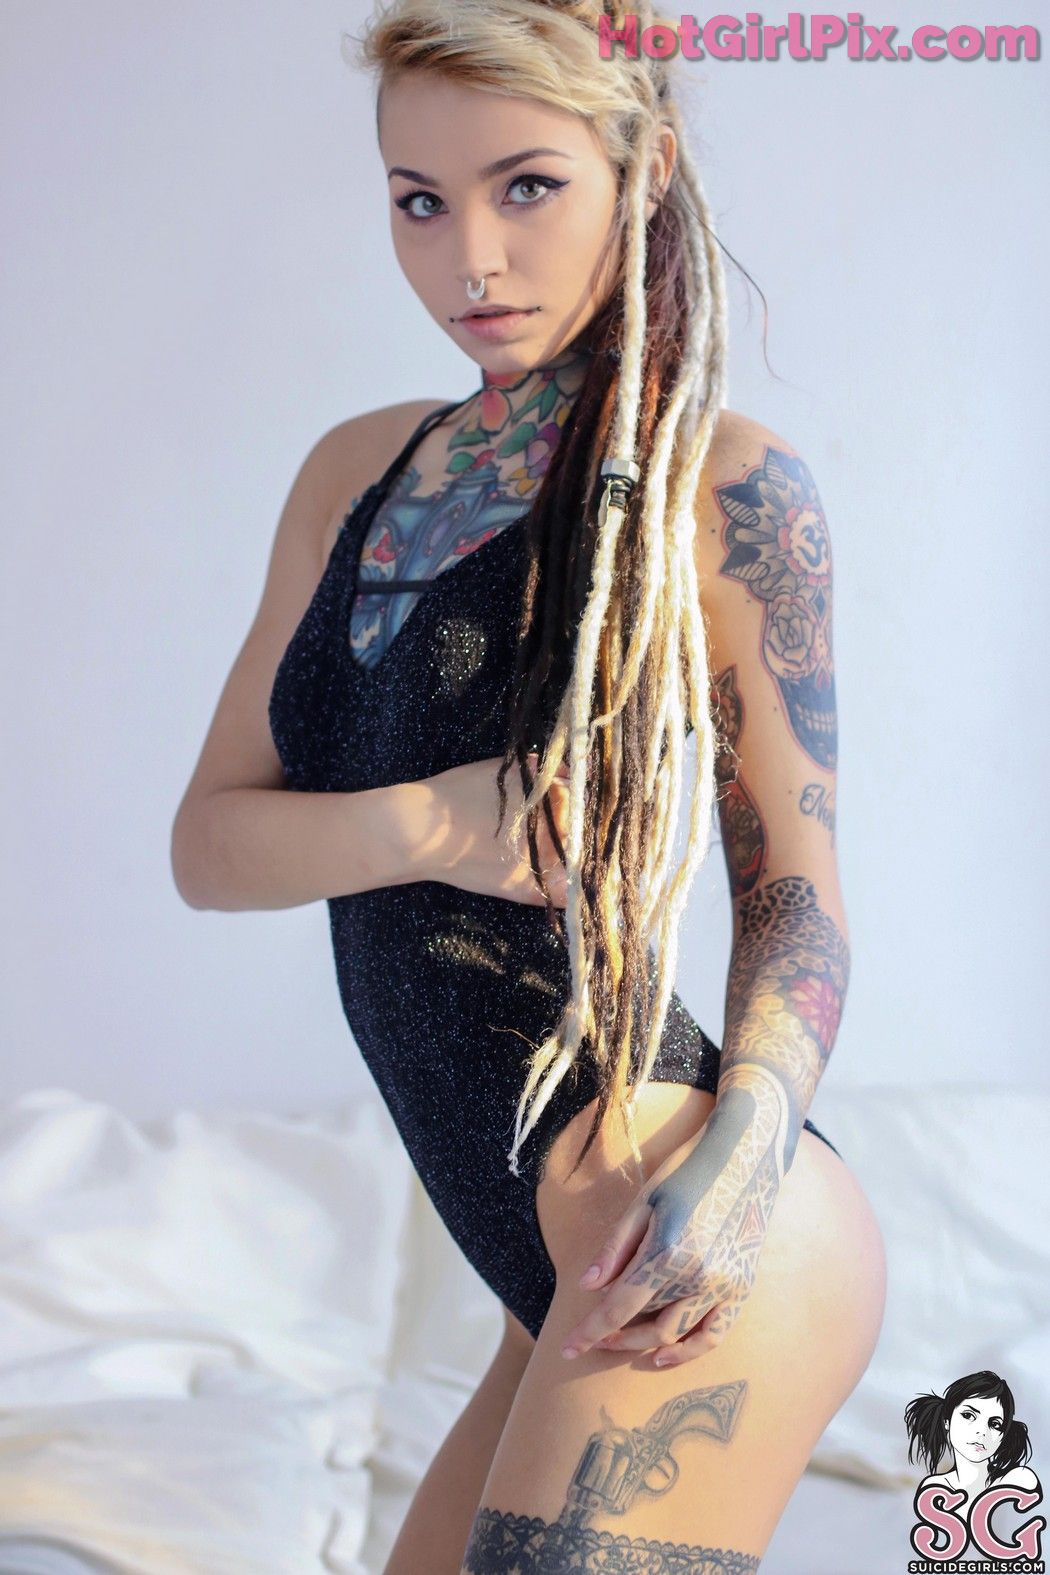 [Suicide Girls] Fishball - White Nymph